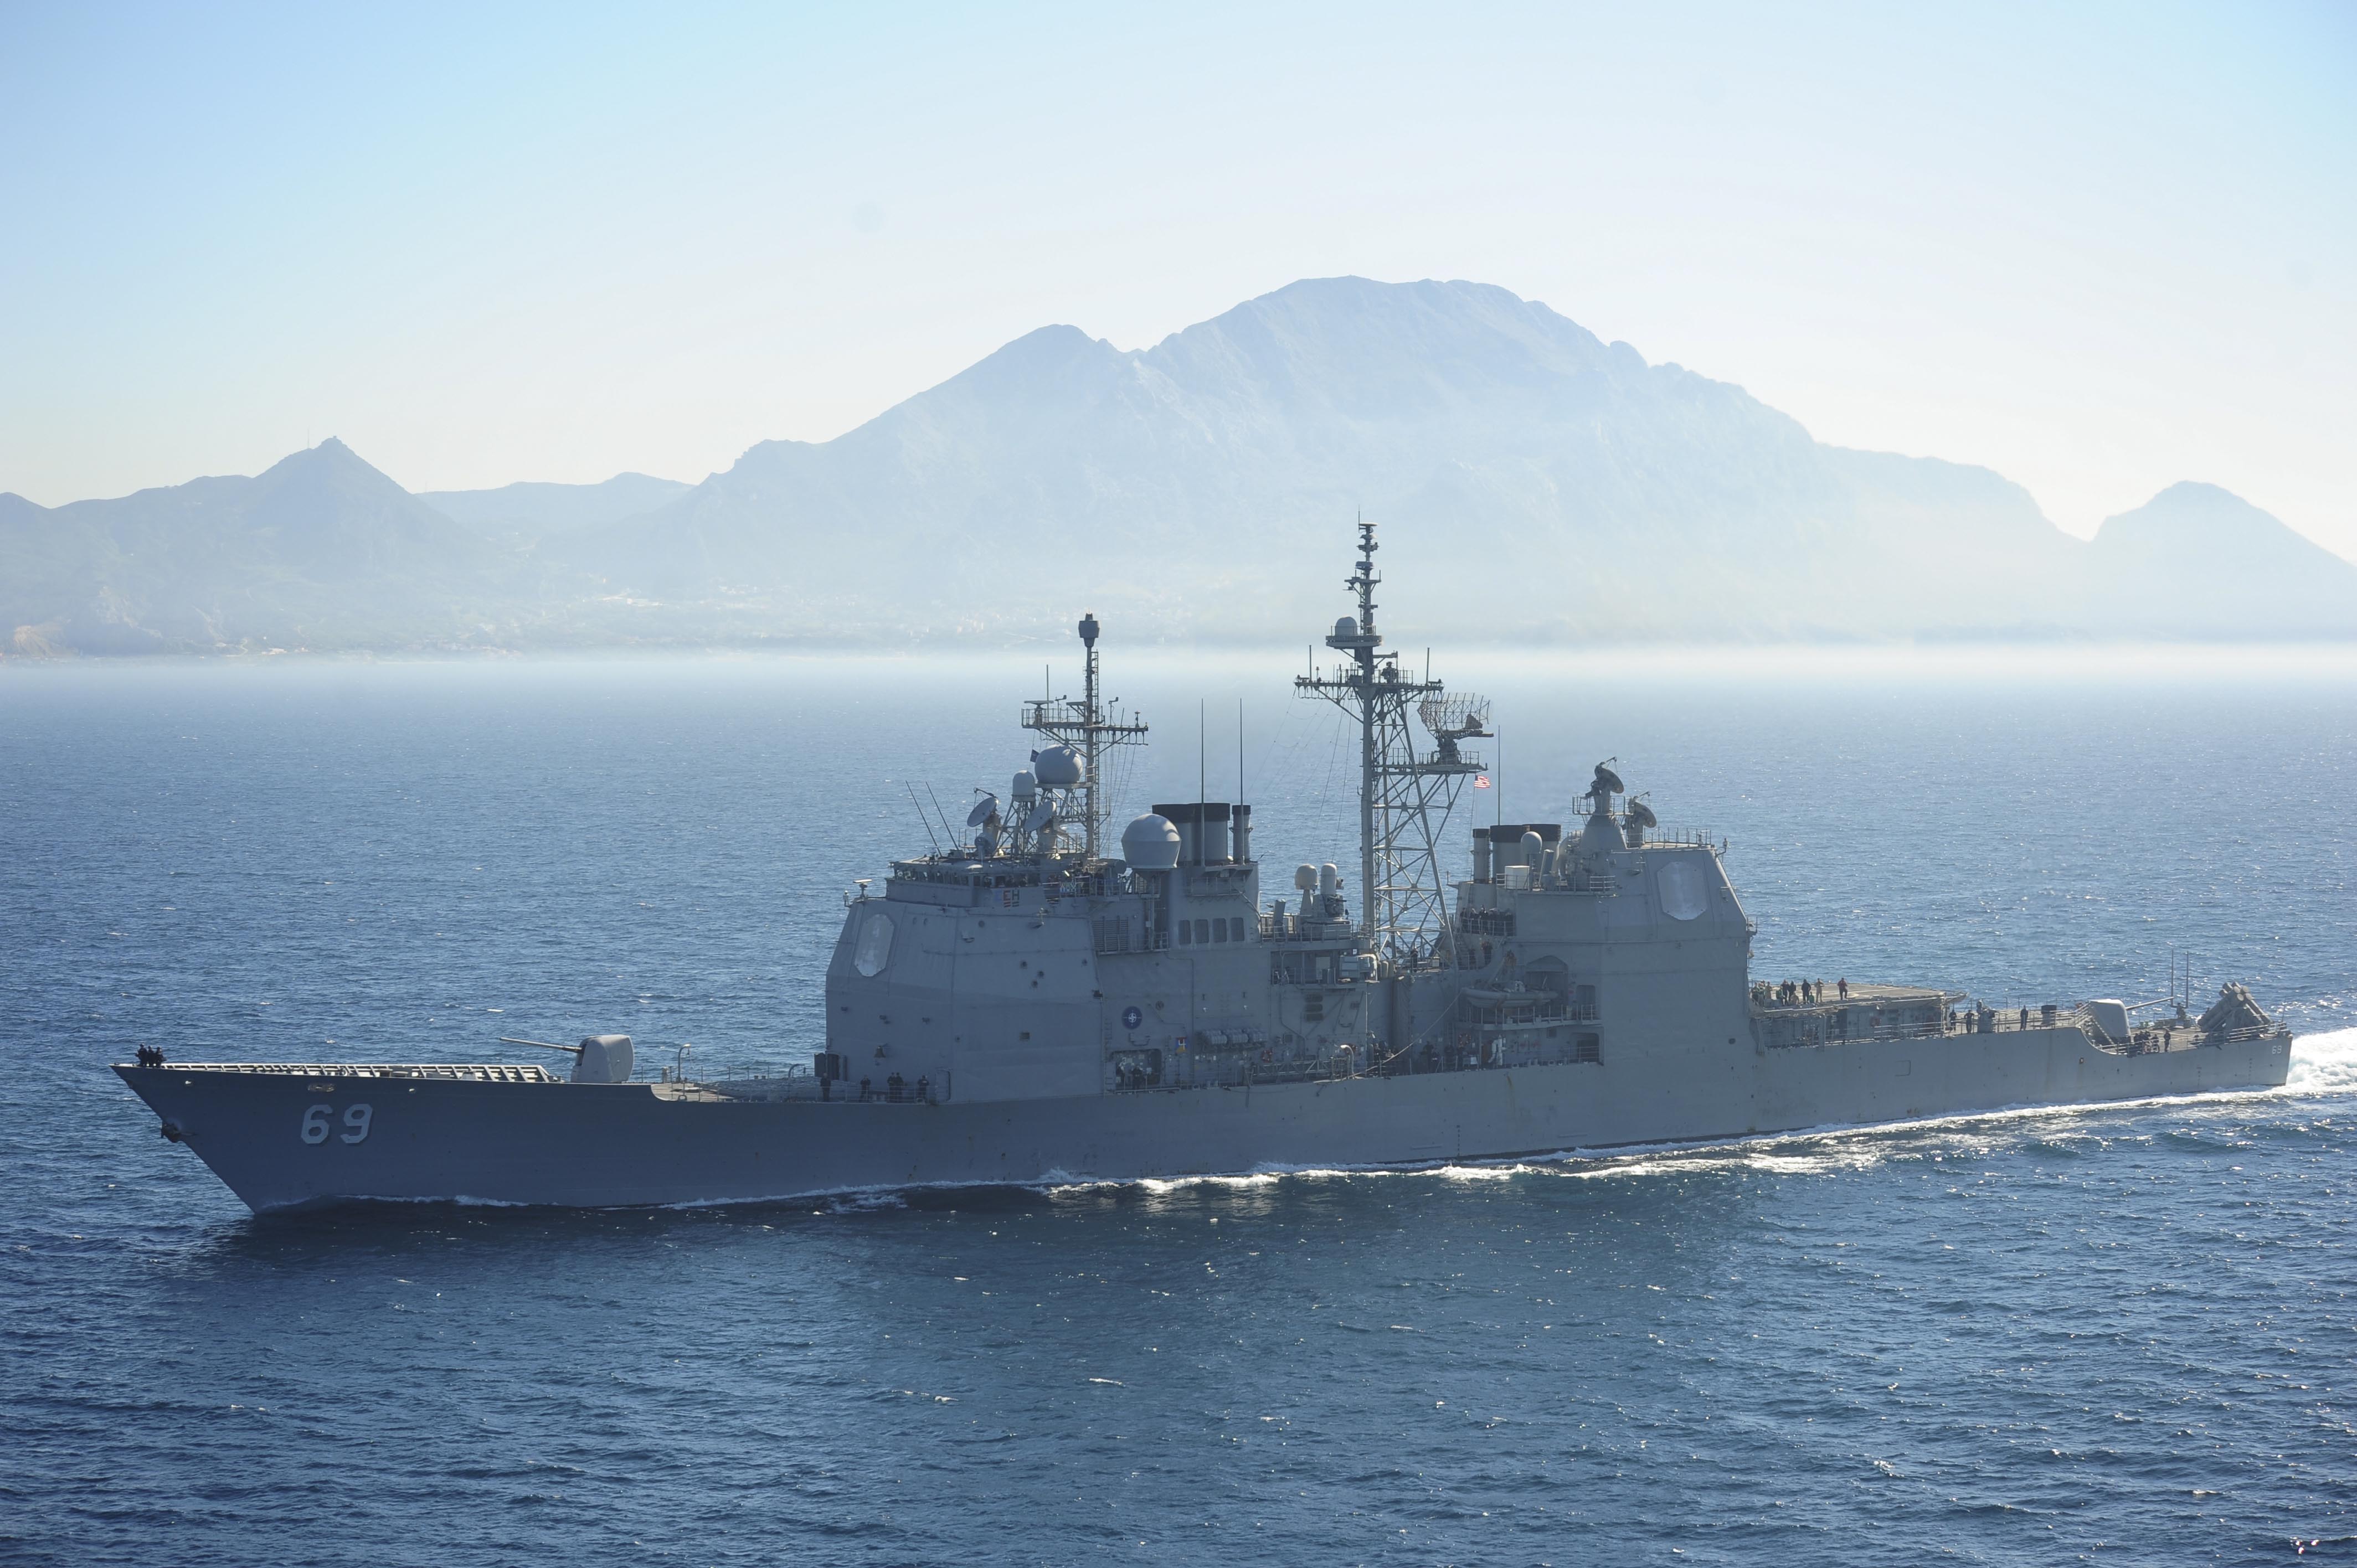 The Ticonderoga-class guided-missile cruiser USS Vicksburg (CG 69) transits the Strait of Gibraltar on March 31, 2015, as part of the Theodore Roosevelt Carrier Strike Group. US Navy photo.